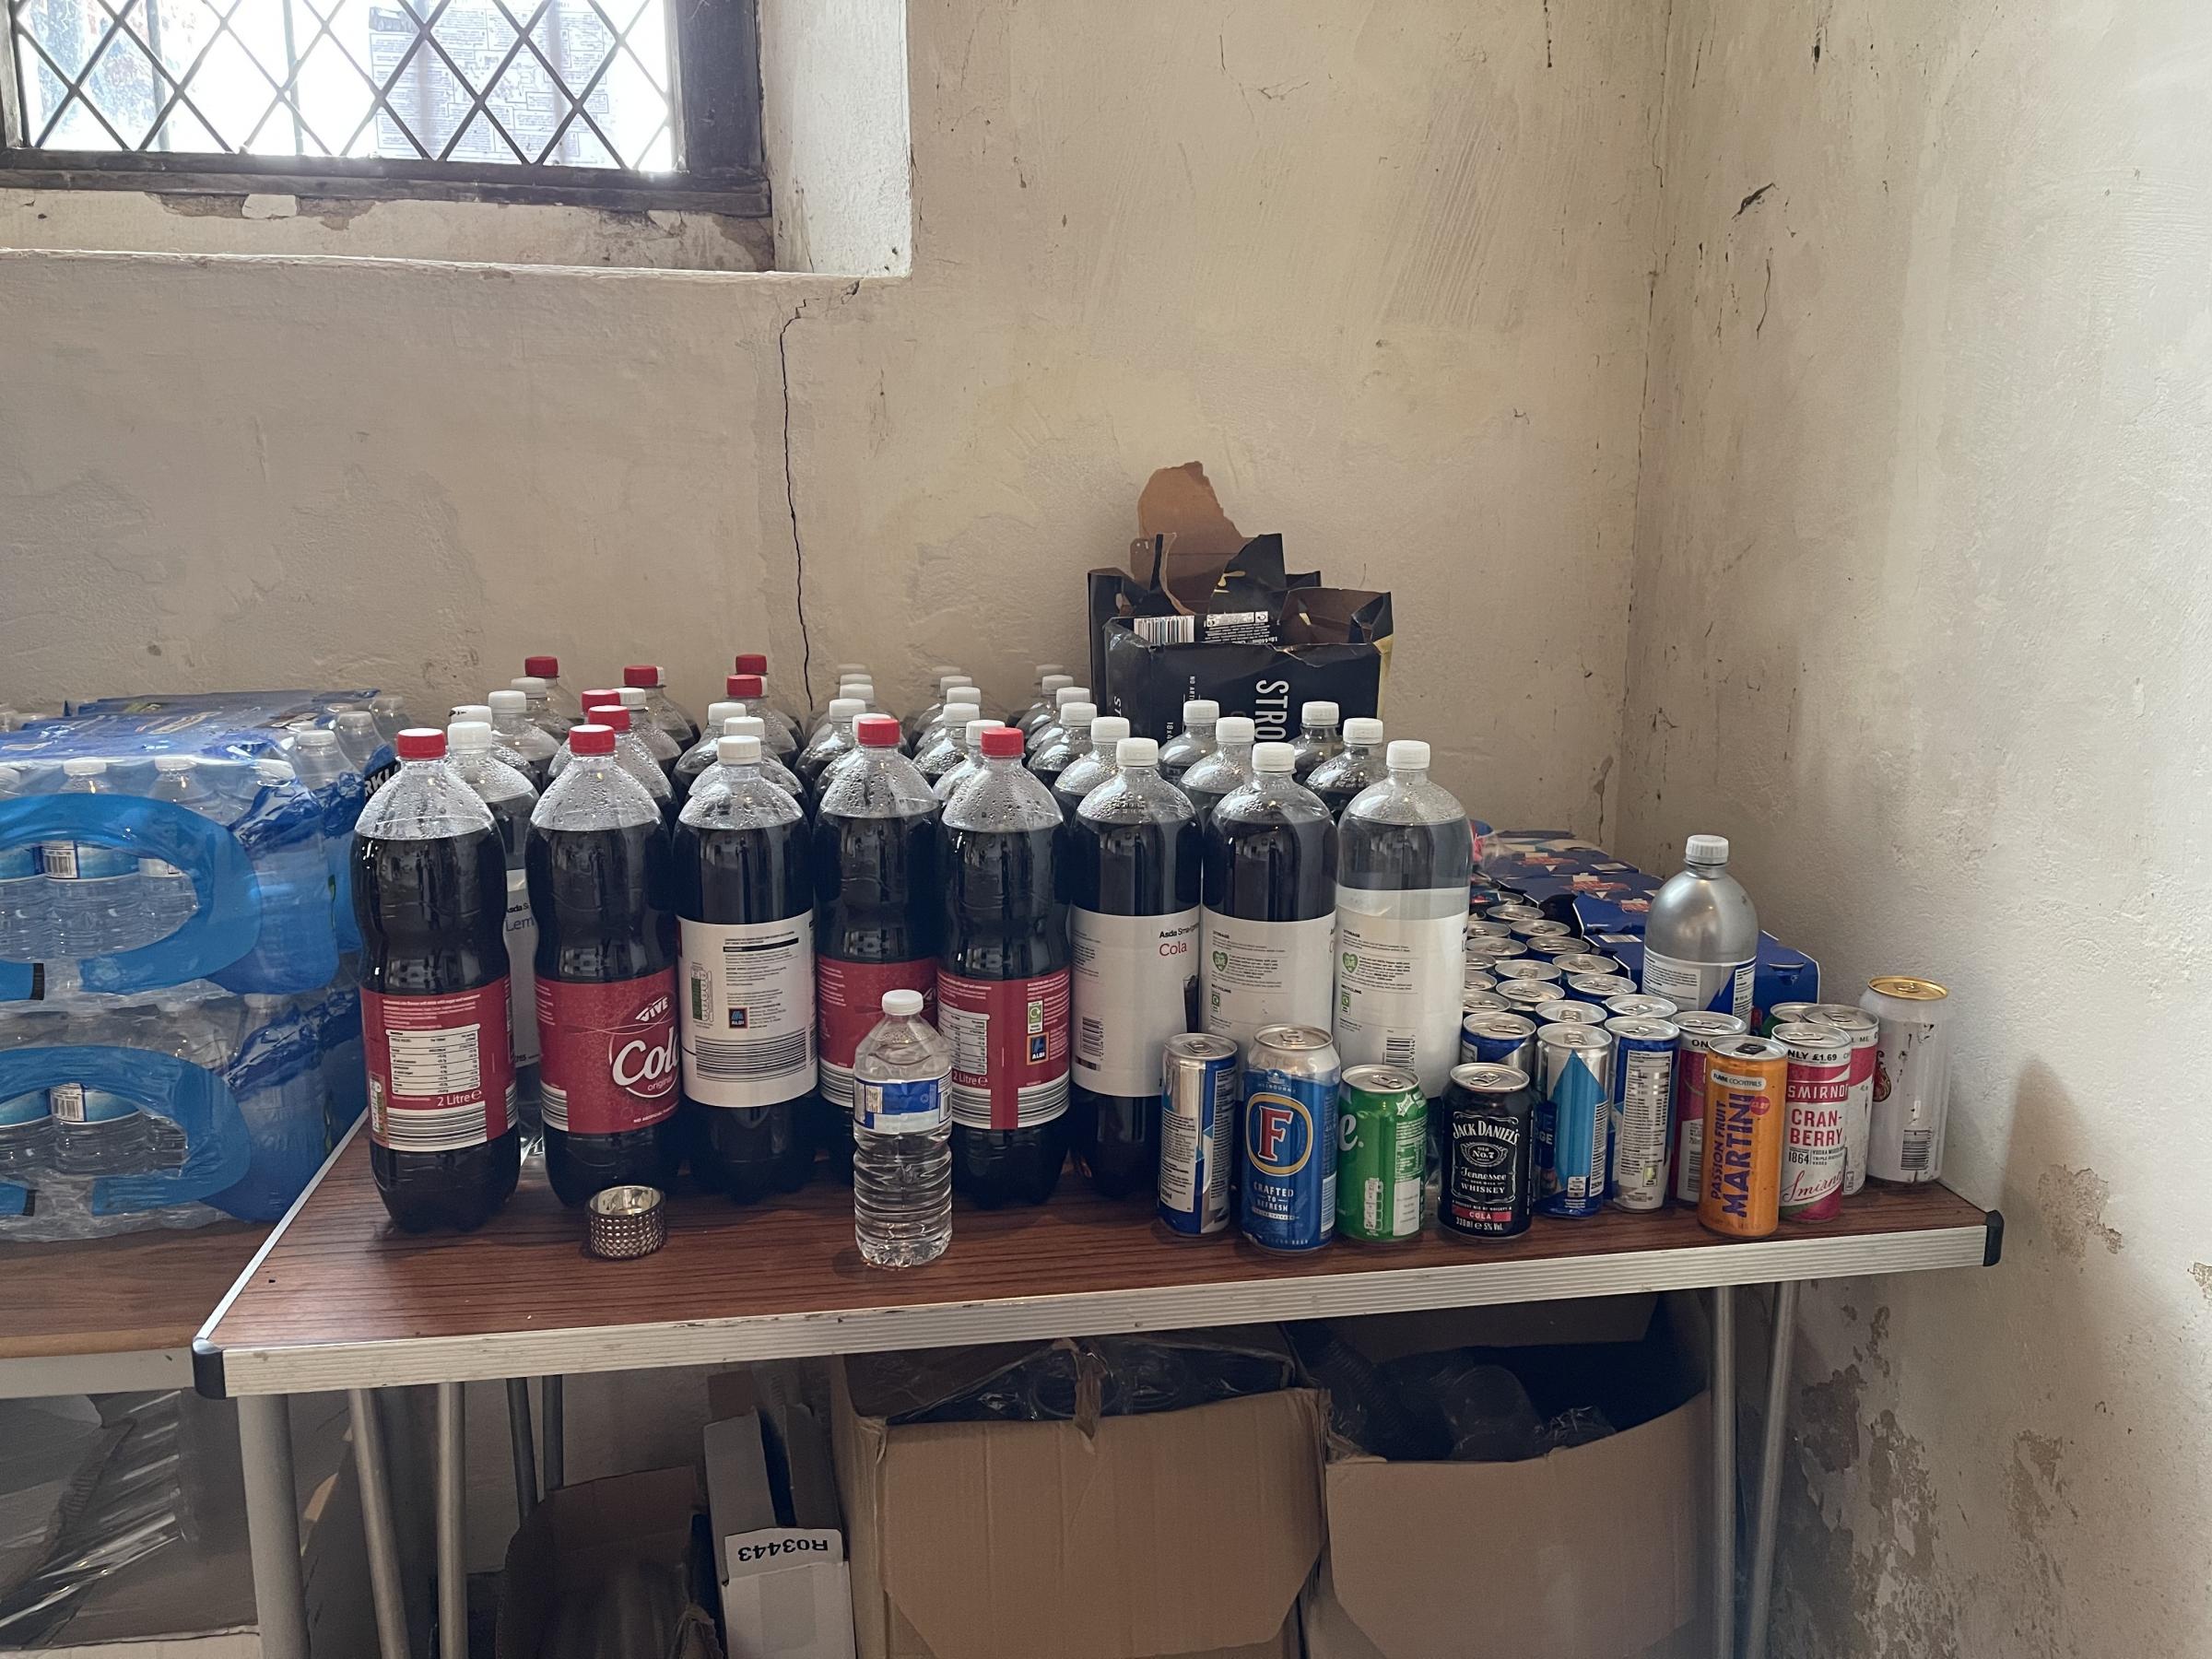 Drinks and damage the morning after the party in All Saints Church. Photo: Essex Police